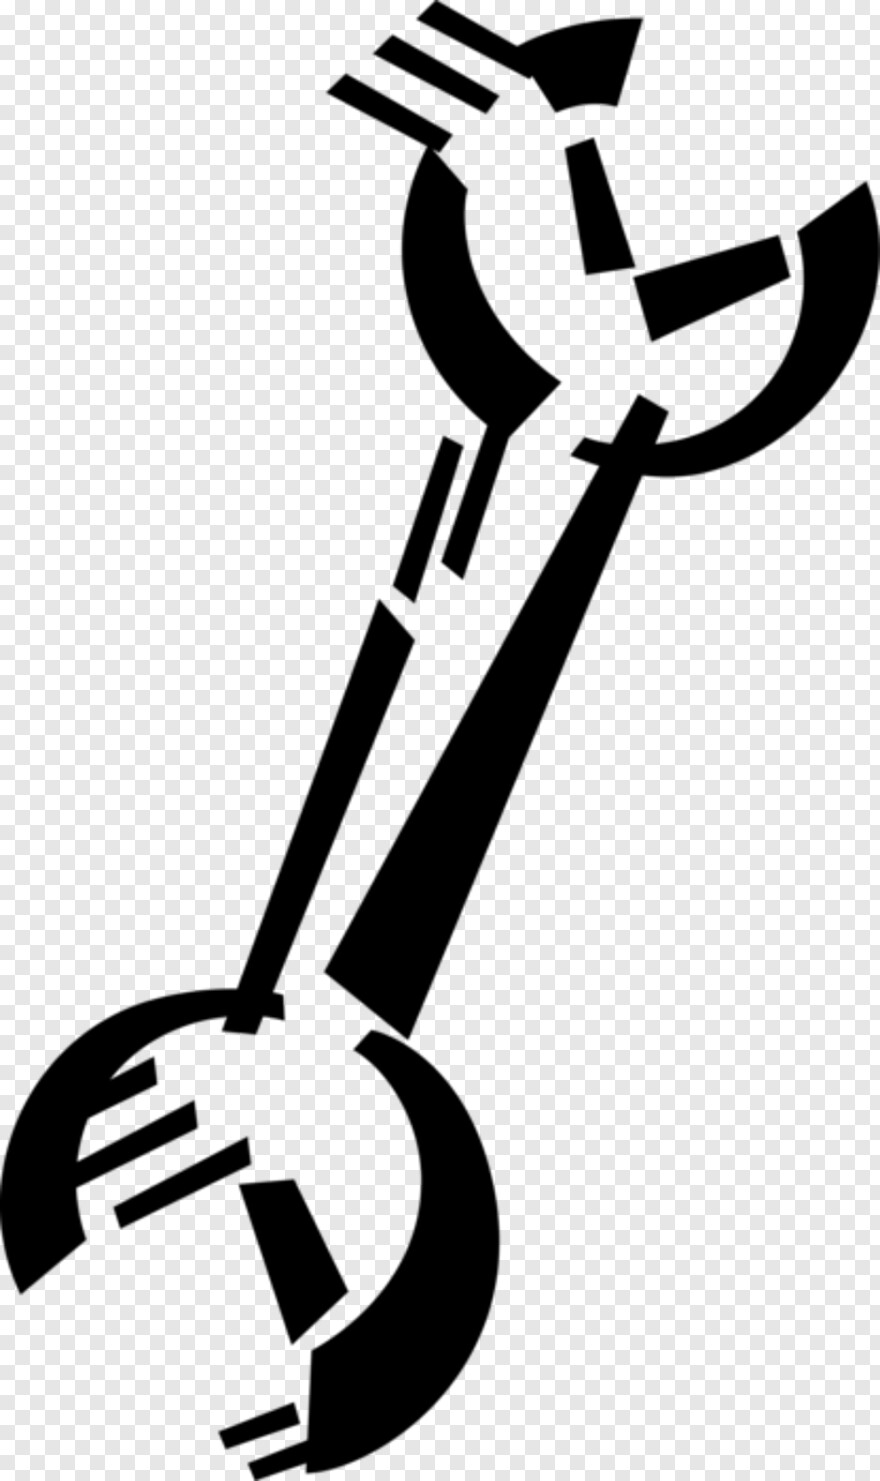 wrench-vector # 565725